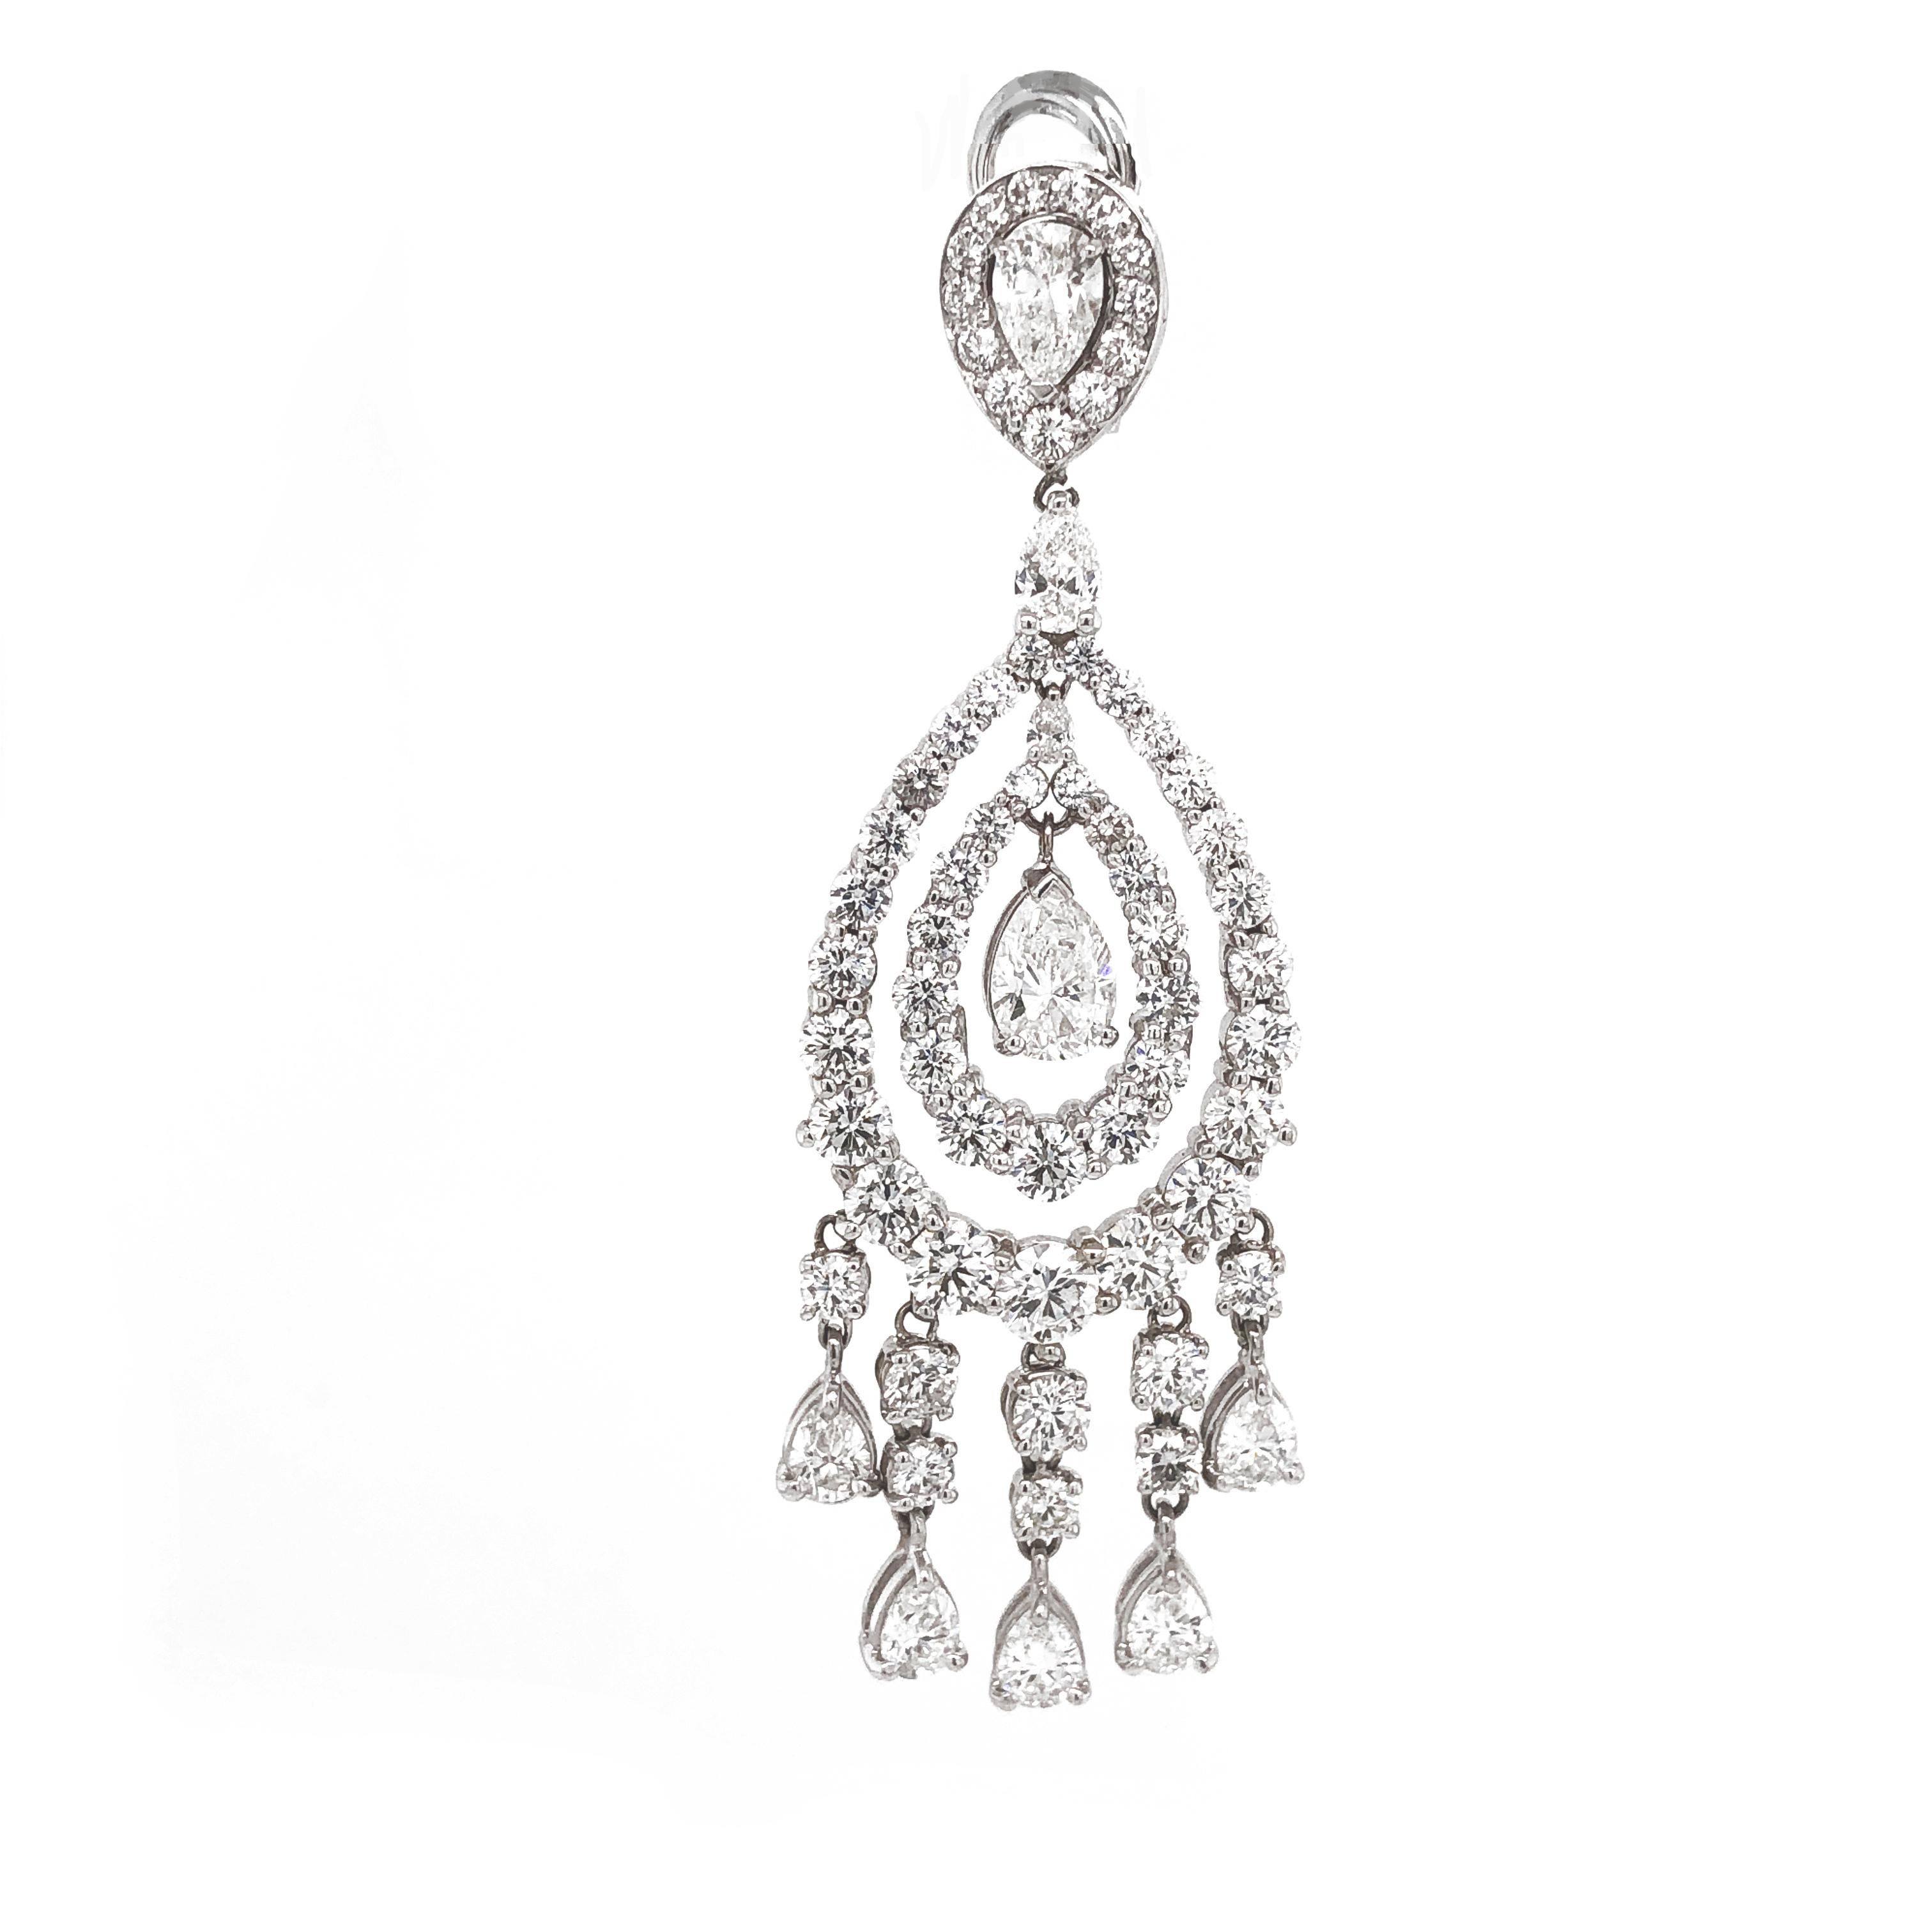 Handcrafted pear cut diamonds 2.03 ct chandelier 18 karat gold earrings.
Accented with small round diamonds 19.38 ct.
Diamonds are all natural and white in G-H Color Clarity VS. 
French / Omega clips.
Weight: 26.35 g